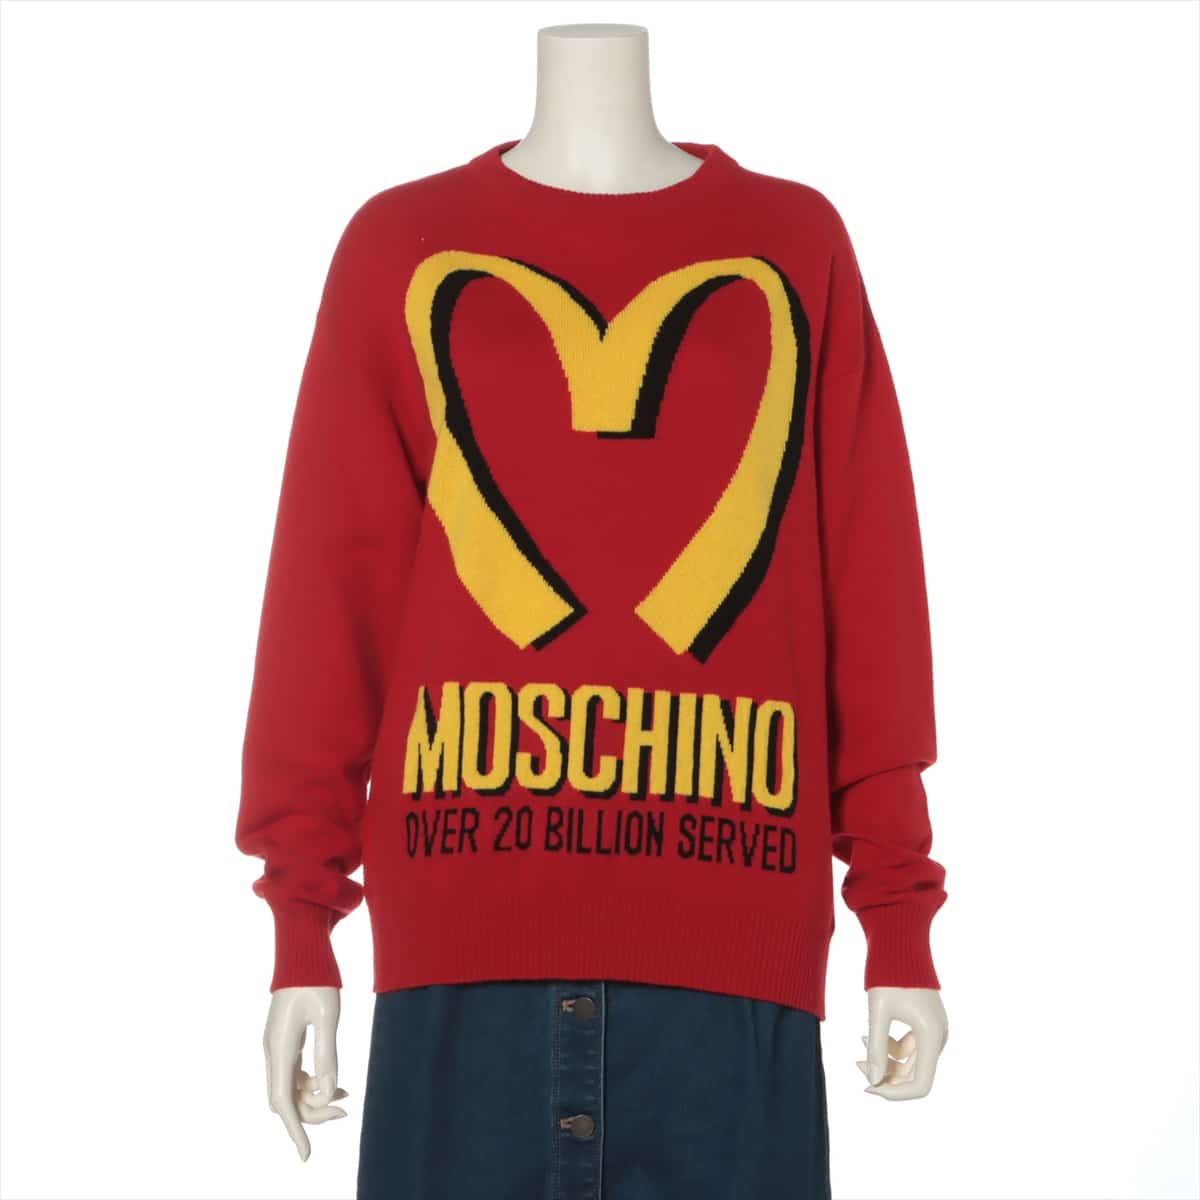 Moschino Wool & cashmere Knit XS Ladies' Red